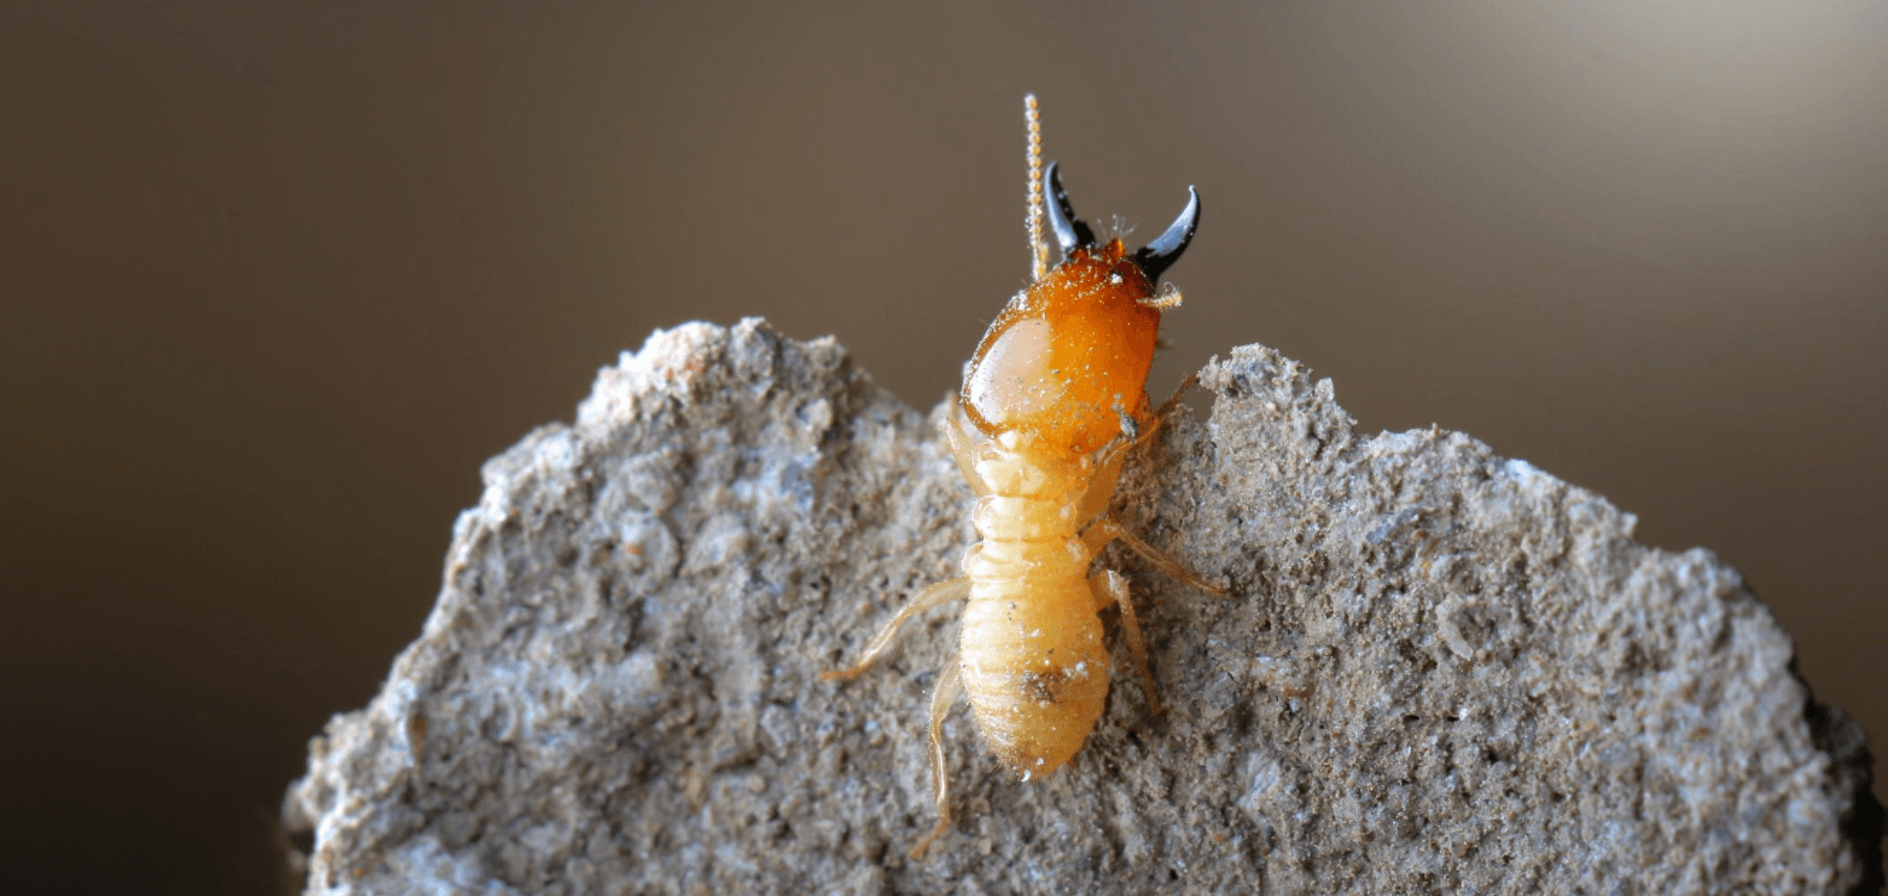 How can i tell if i have termites?